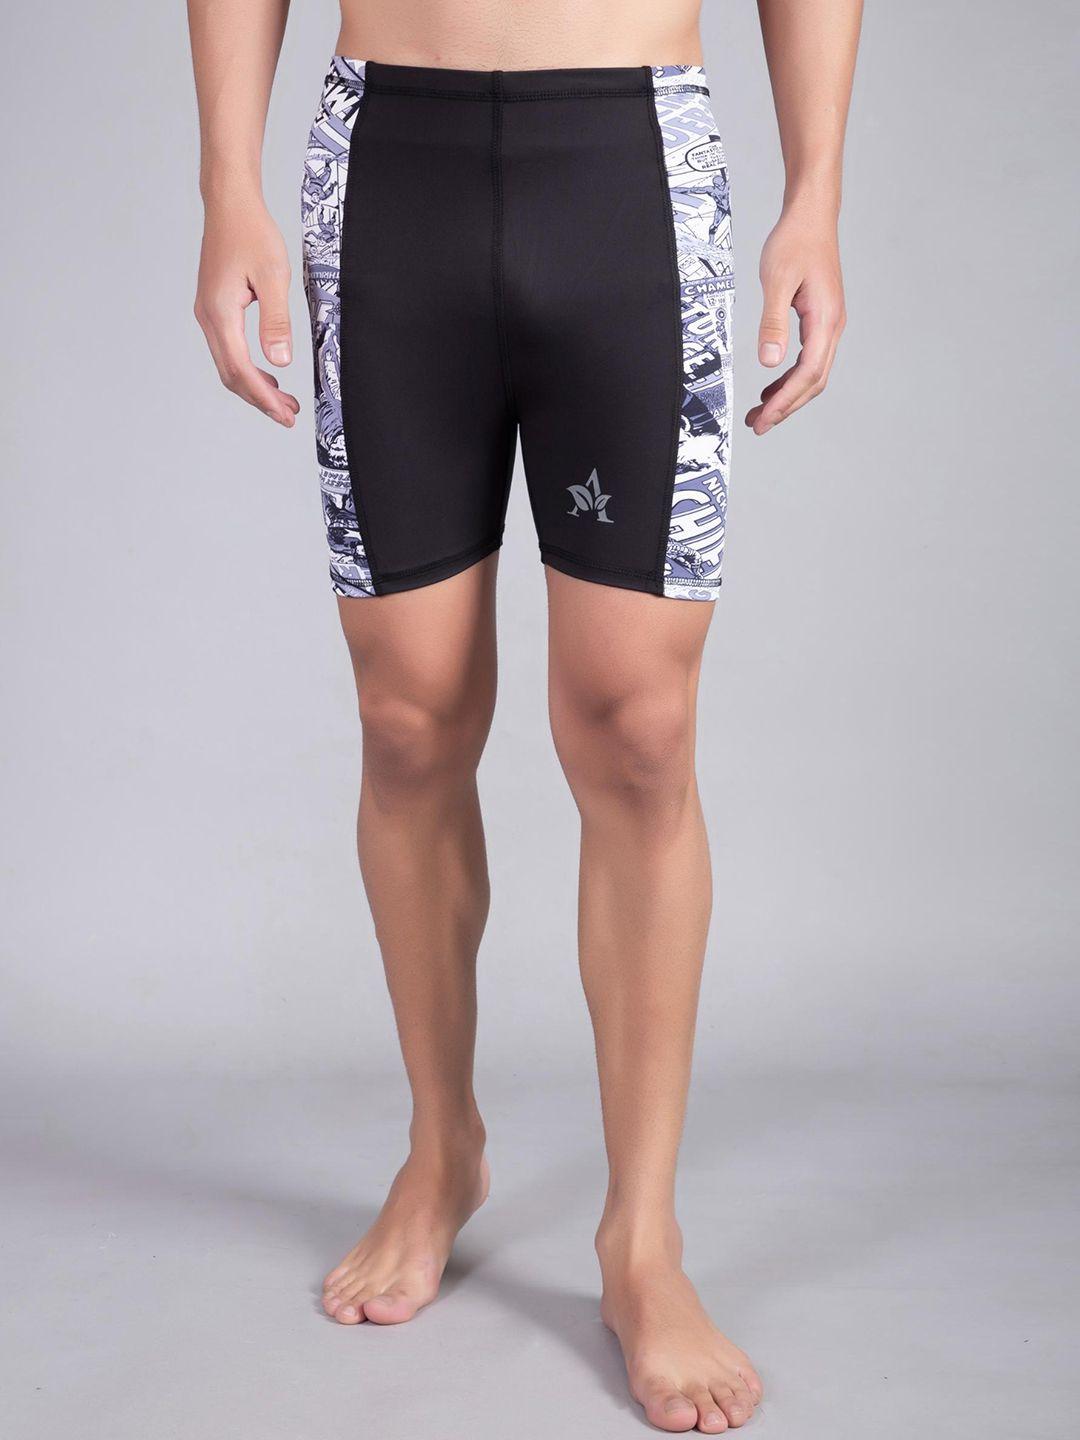 apraa & parma men graphic printed skinny fit running sports shorts